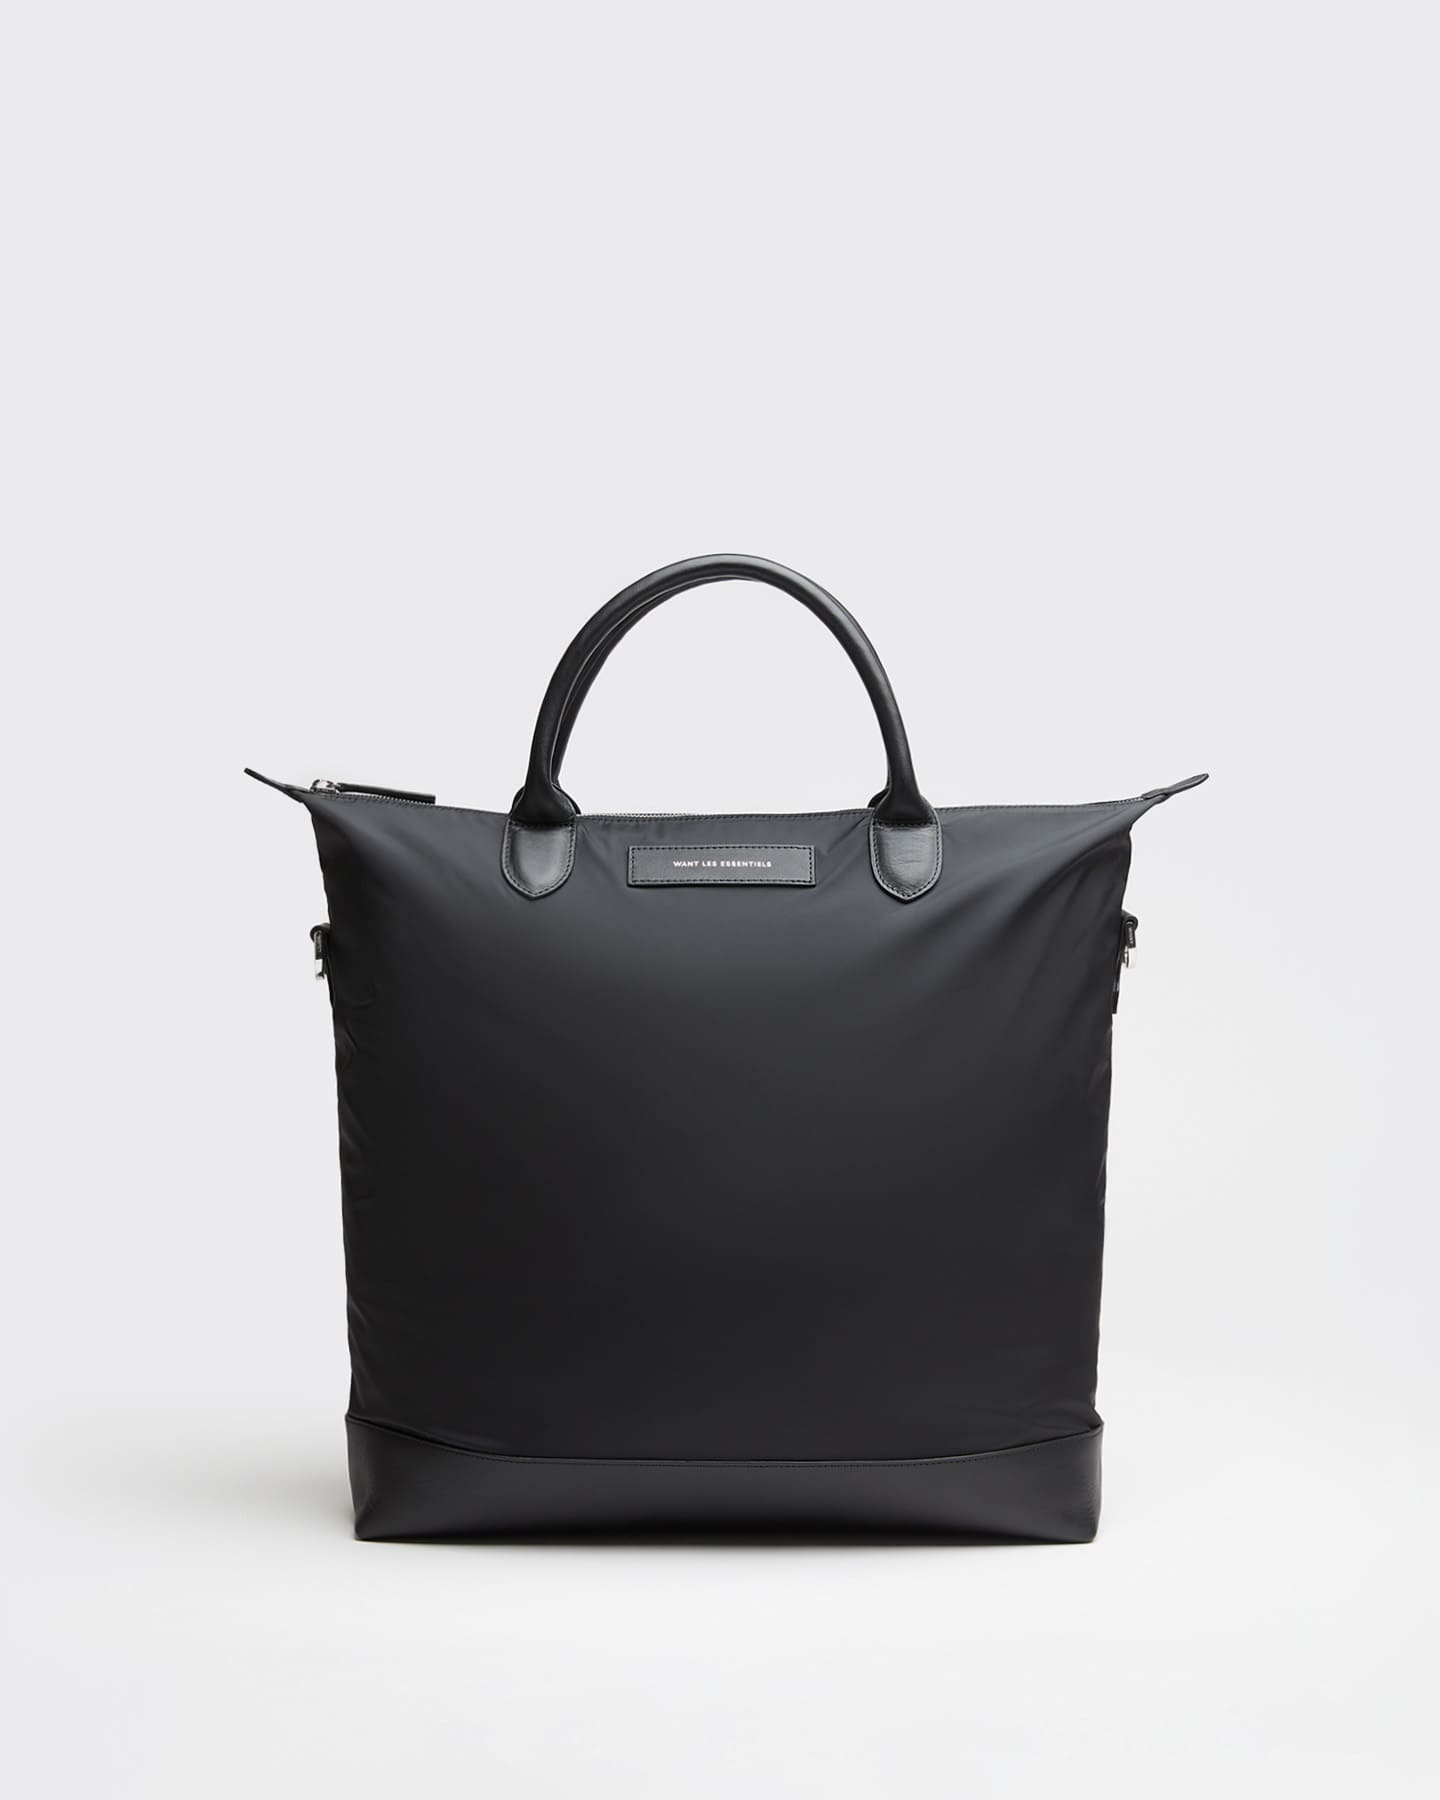 Tote Bags for Women | Tote Purses | WANT Les Essentiels